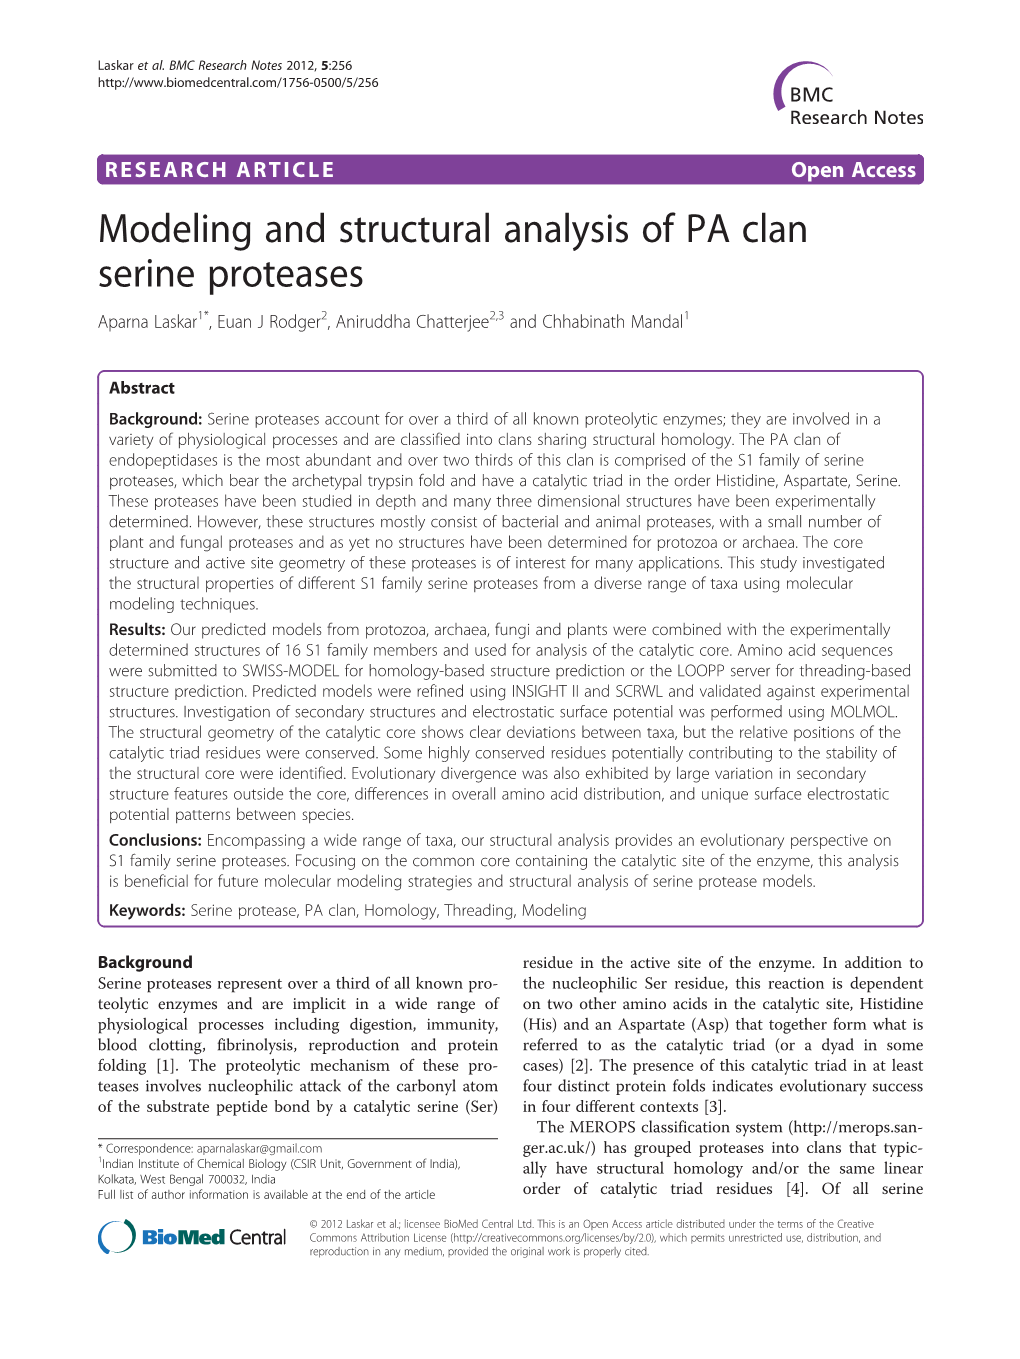 Modeling and Structural Analysis of PA Clan Serine Proteases Aparna Laskar1*, Euan J Rodger2, Aniruddha Chatterjee2,3 and Chhabinath Mandal1